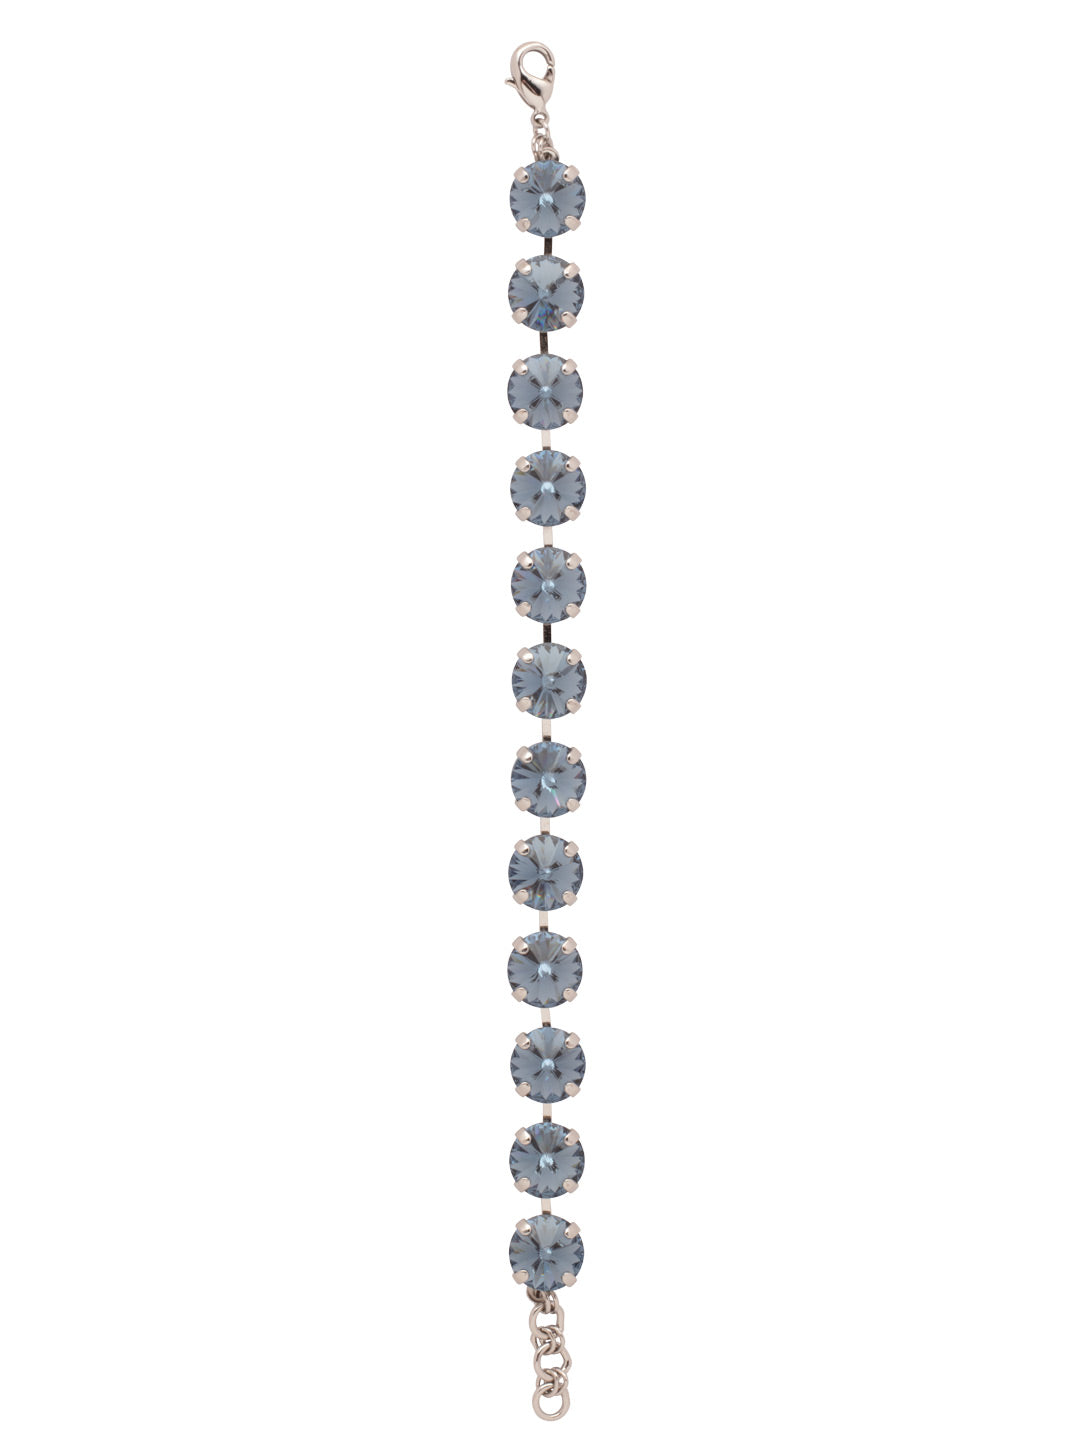 Mara Repeating Tennis Bracelet - BFL75PDASP - <p>The Mara Repeating Tennis Bracelet features a full line of round cut crystals, secured with a lobster claw clasp. From Sorrelli's Aspen SKY collection in our Palladium finish.</p>